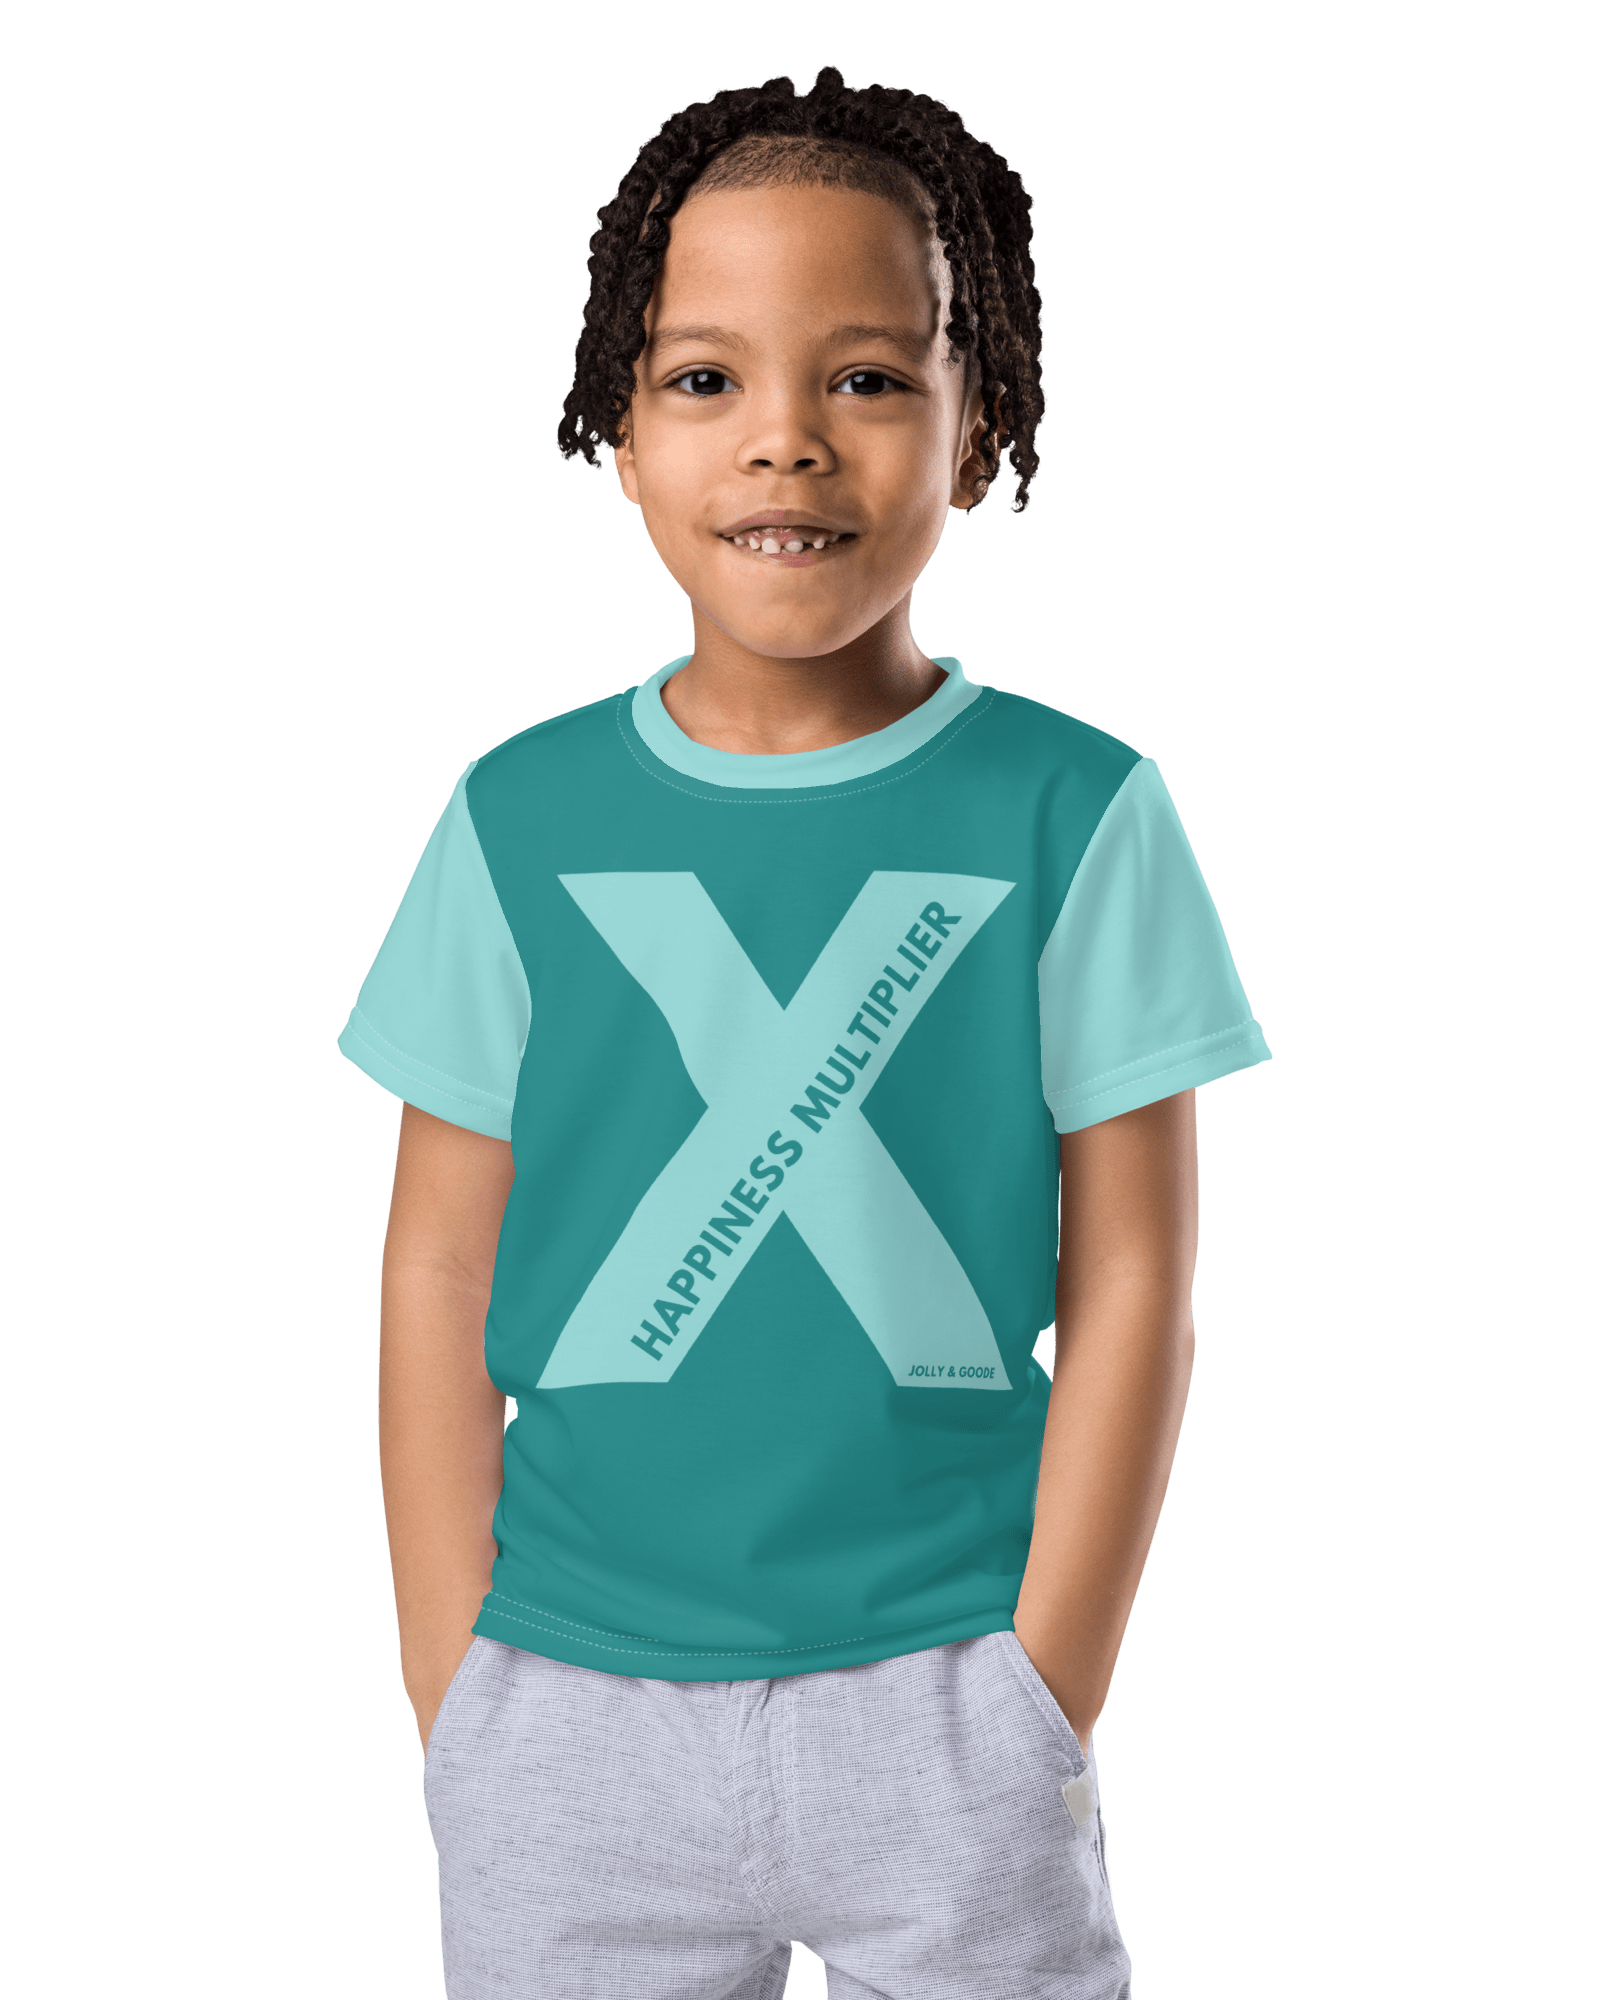 Happiness Multiplier Kids Shirt in Cool Jolly & Goode